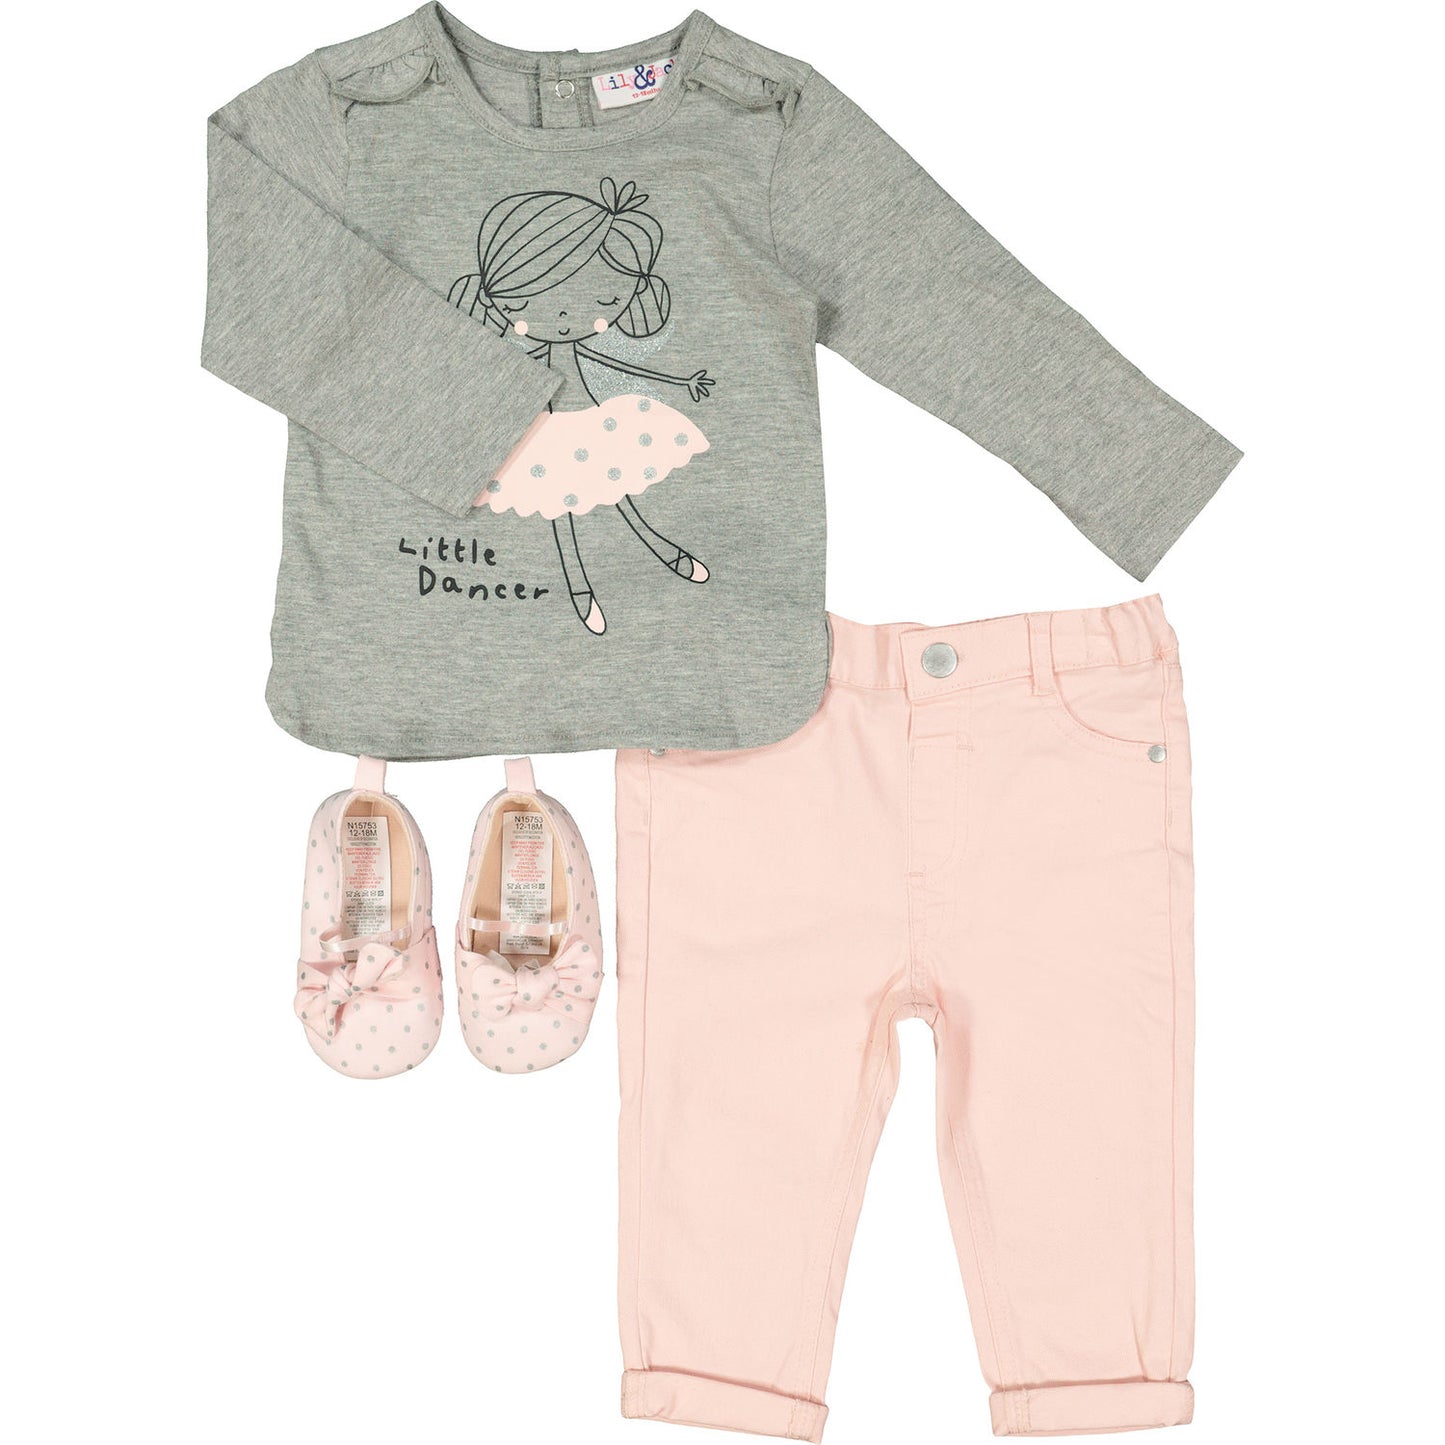 Grey and Pink Little Dancer Three Piece Outfit